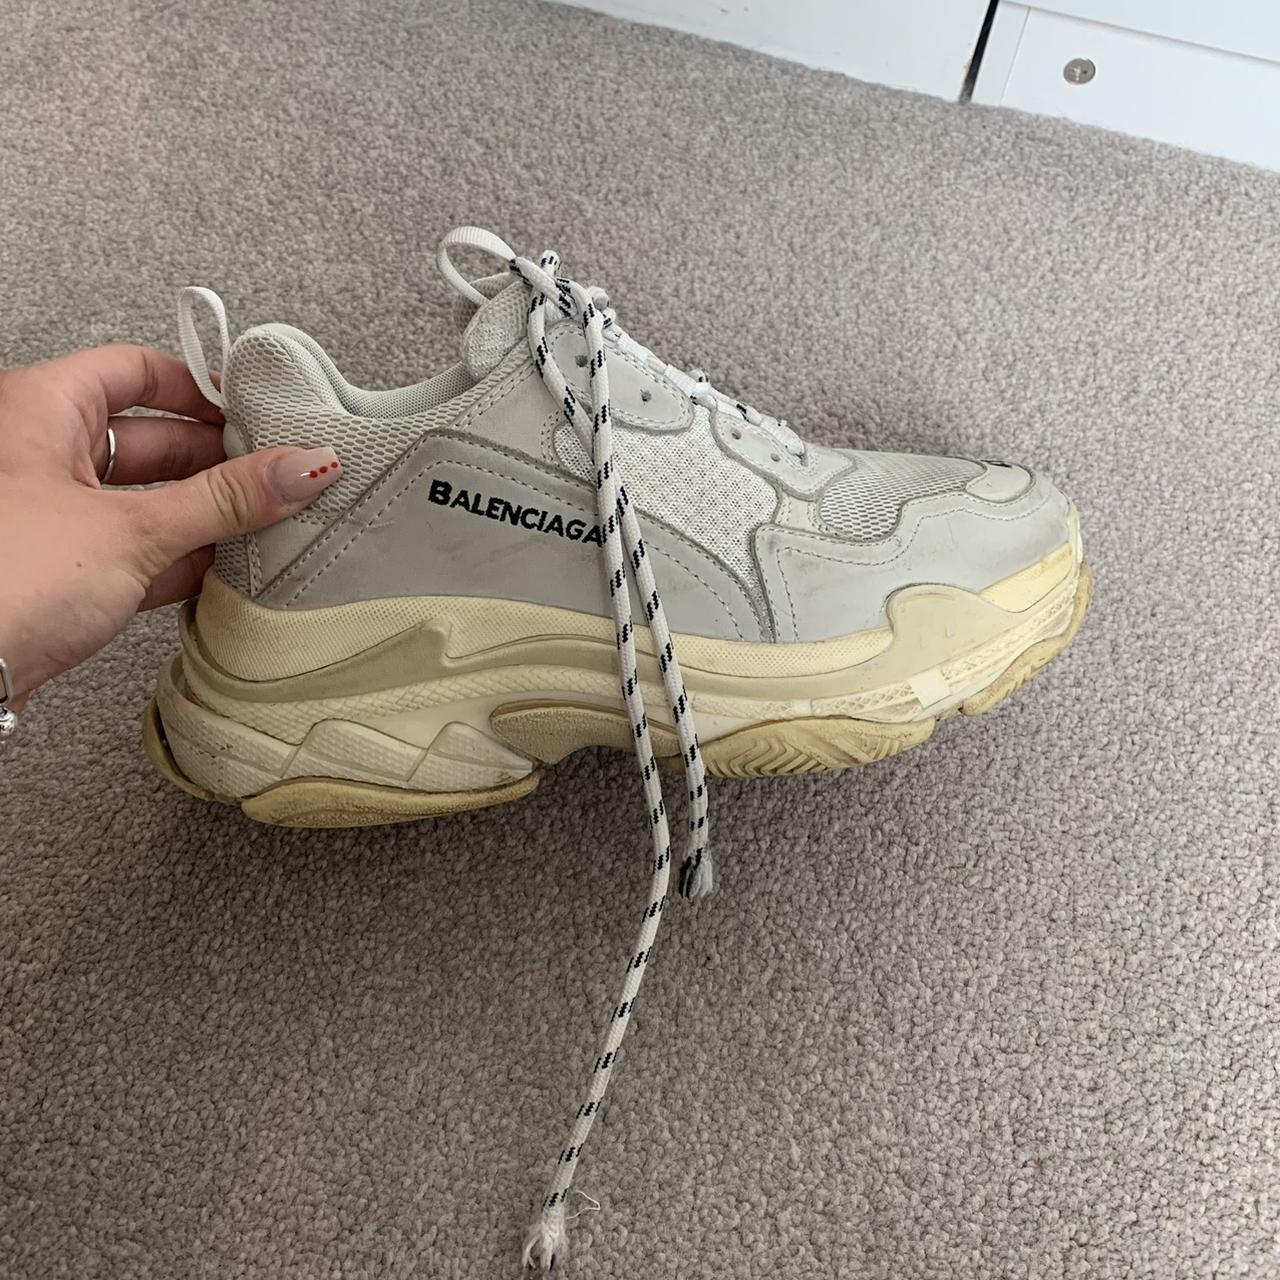 Balenciaga just dropped these for 1850   rSneakers